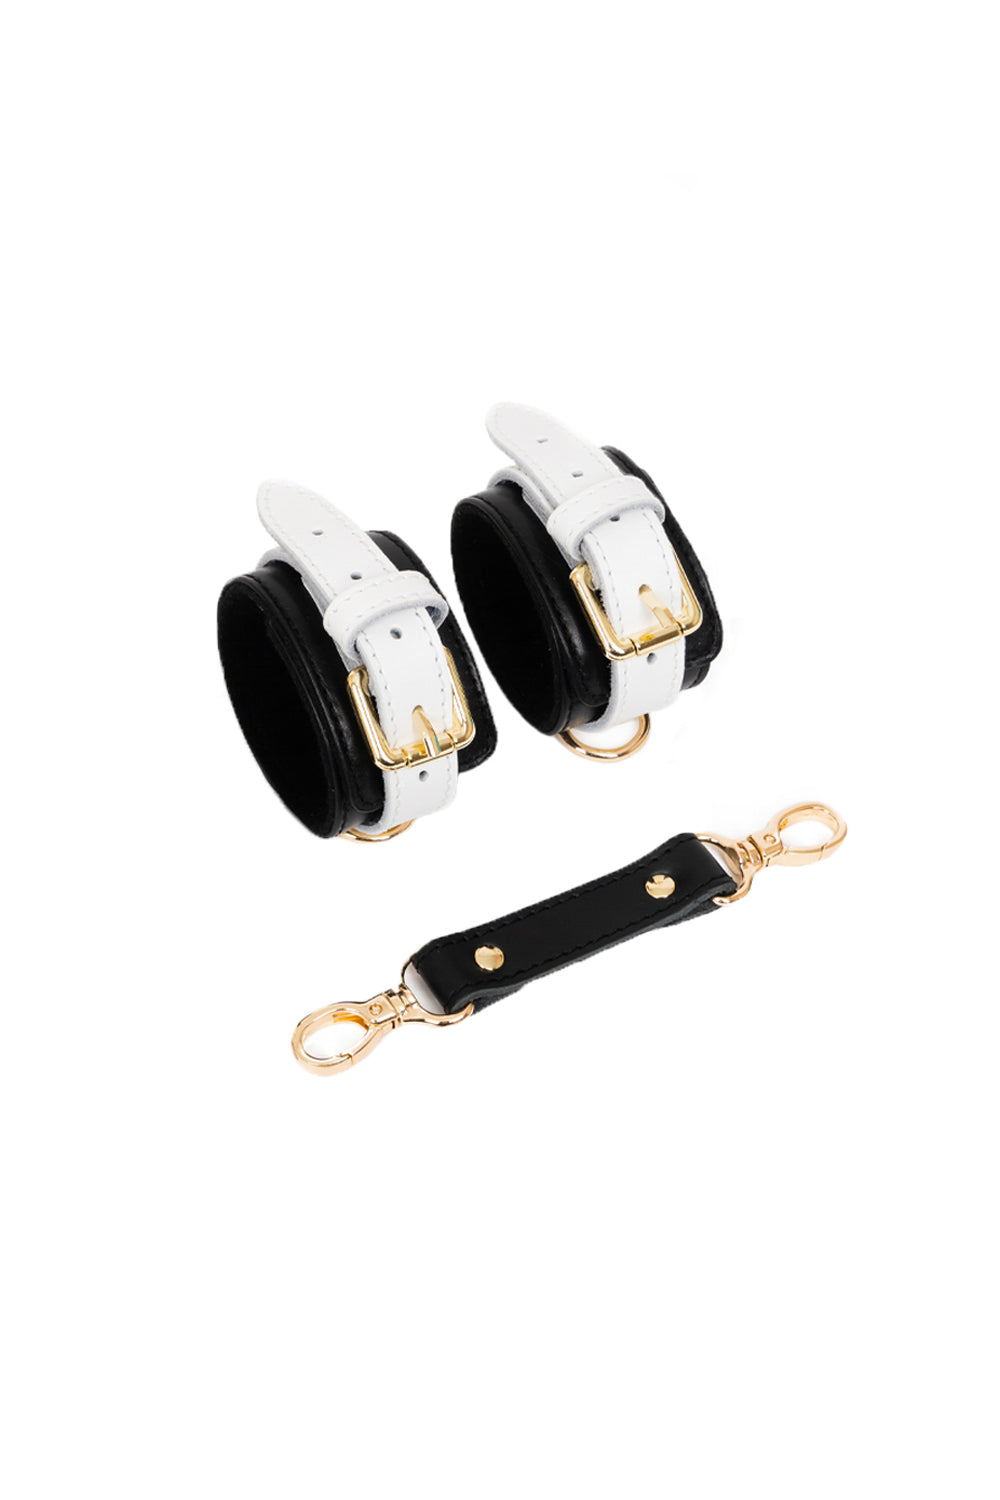 Black'n'White Cuffs for wrists, for ankles with standard leather connector